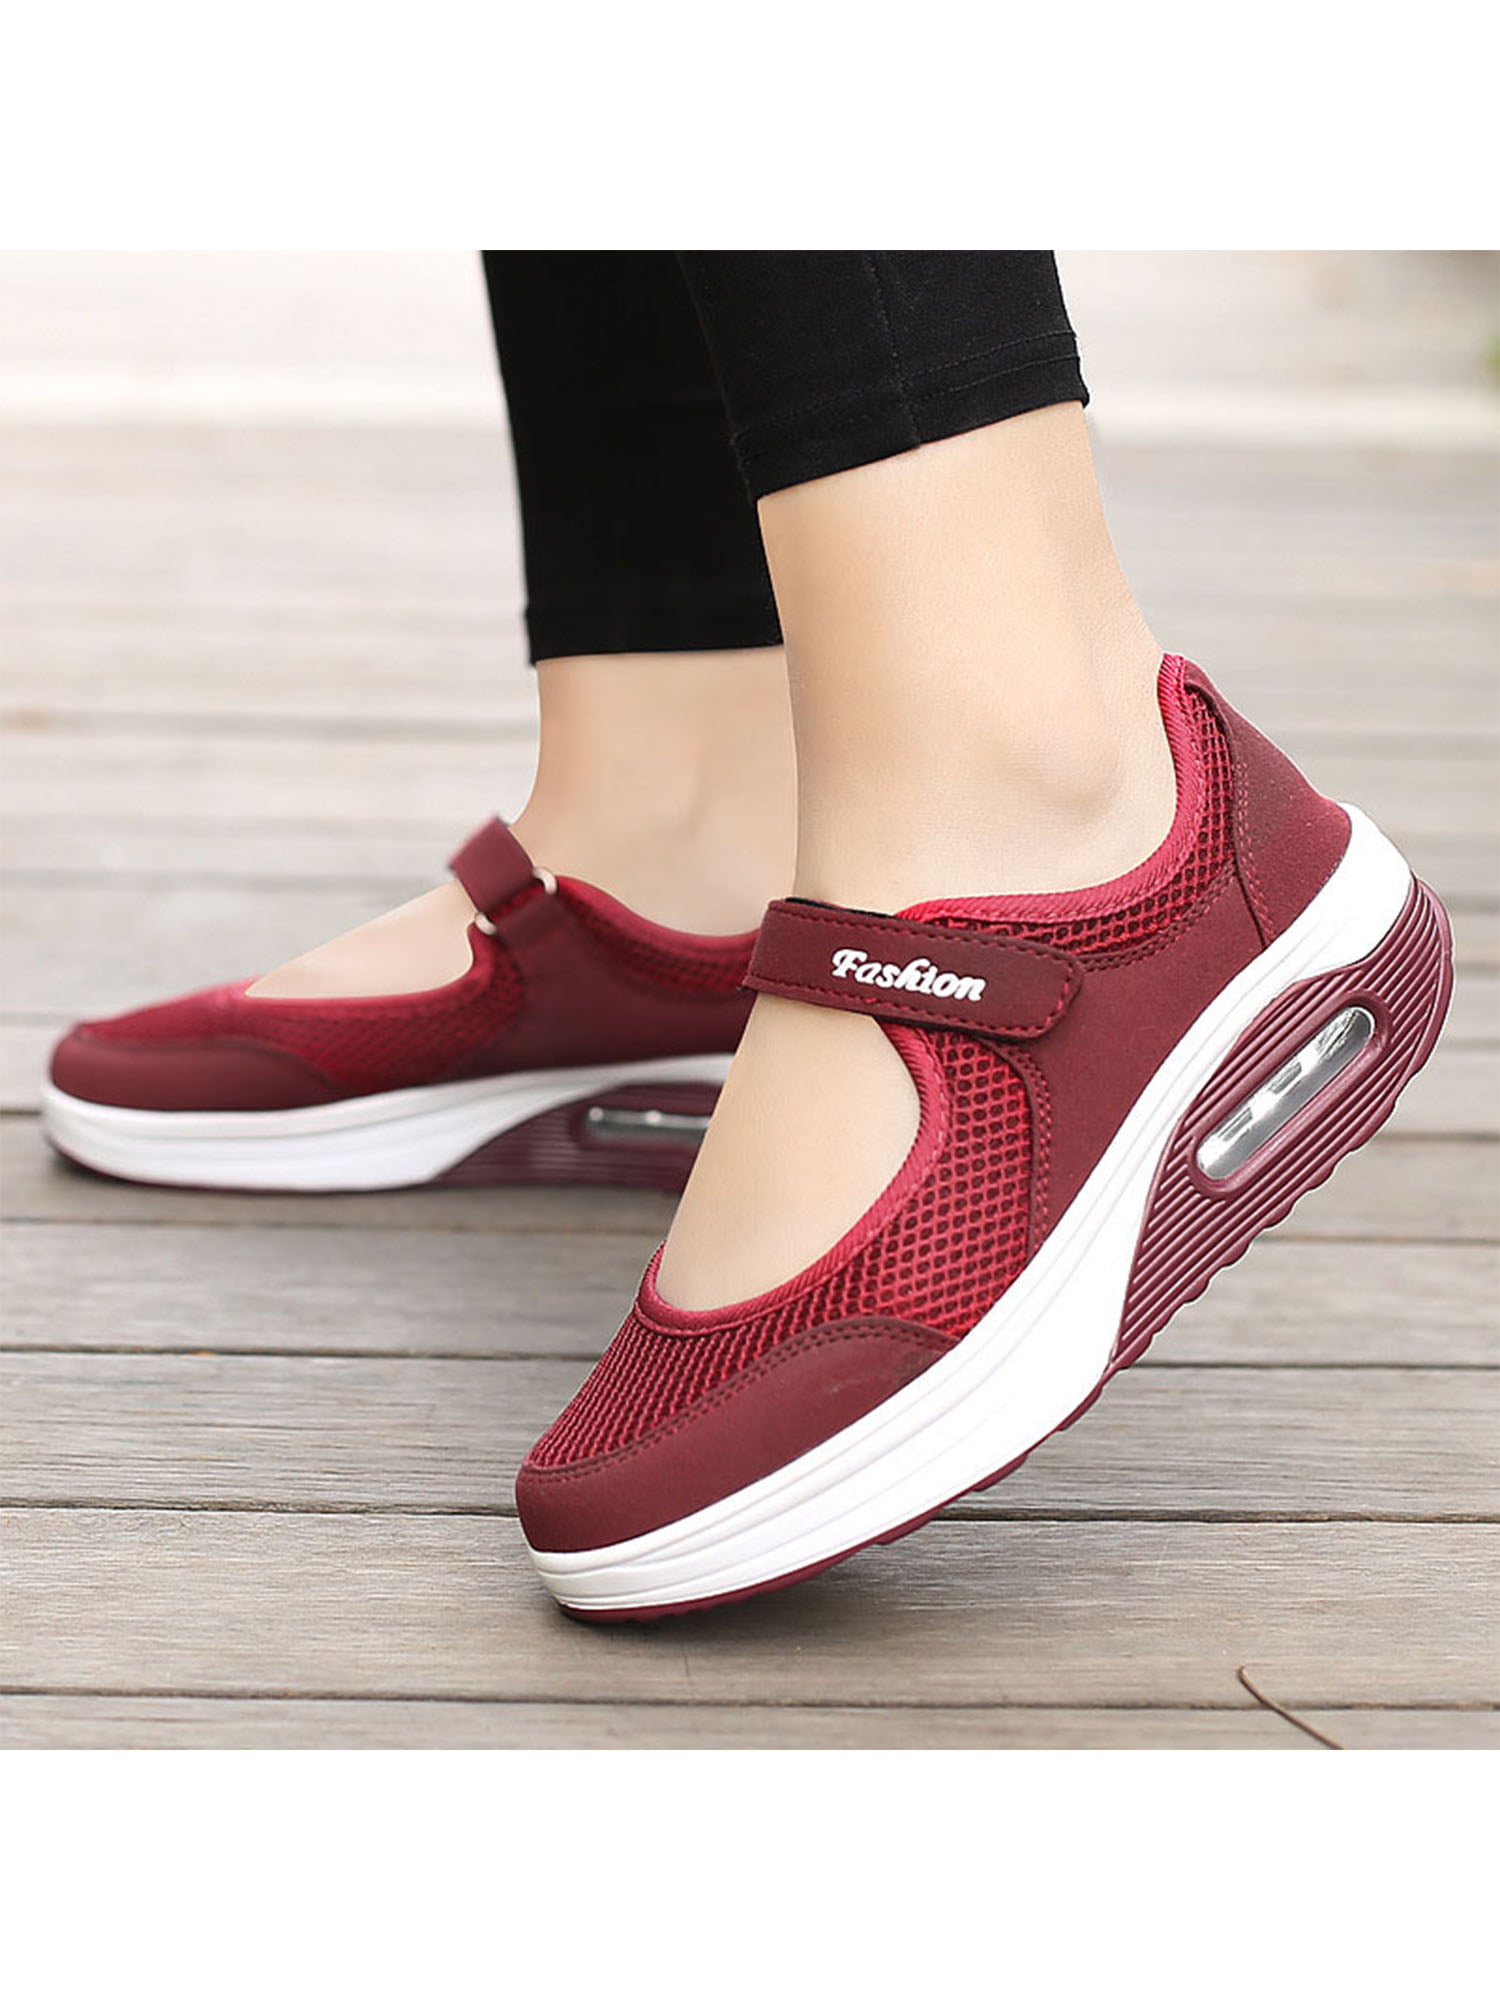 Womens Sneakers,Women's Comfortable Sneakers Working Nurse Shoes Non-Slip Breathable Lightweight Tennis Shoes 